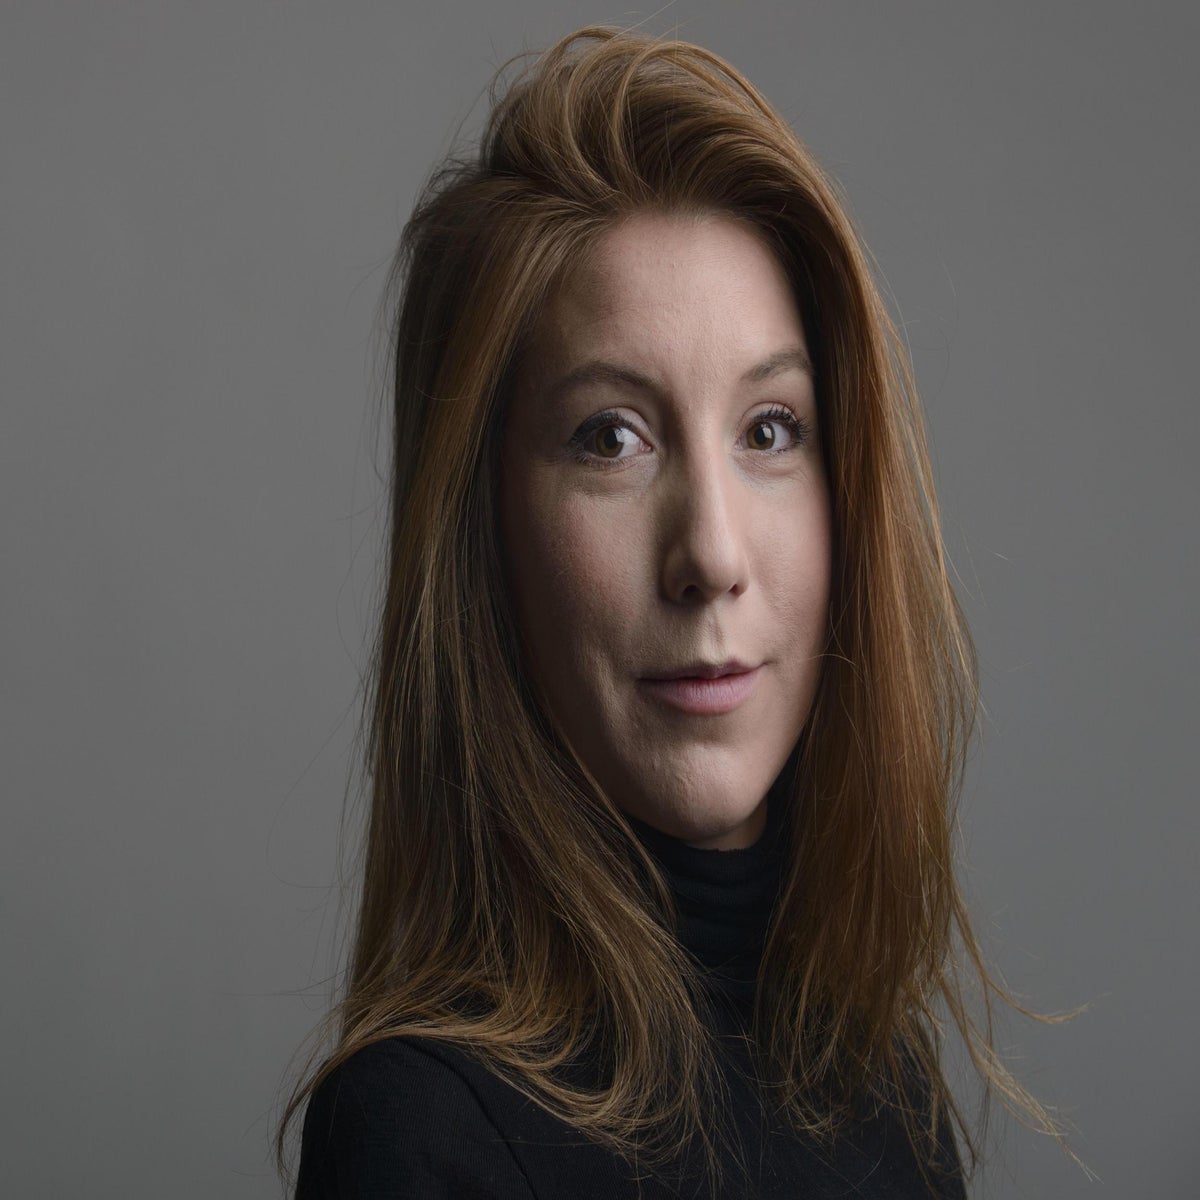 Porn Snuff Dead Girls - I've seen the type of violent snuff porn Peter Madsen viewed before he  murdered Kim Wall â€“ anyone who denies a connection is deluded | The  Independent | The Independent